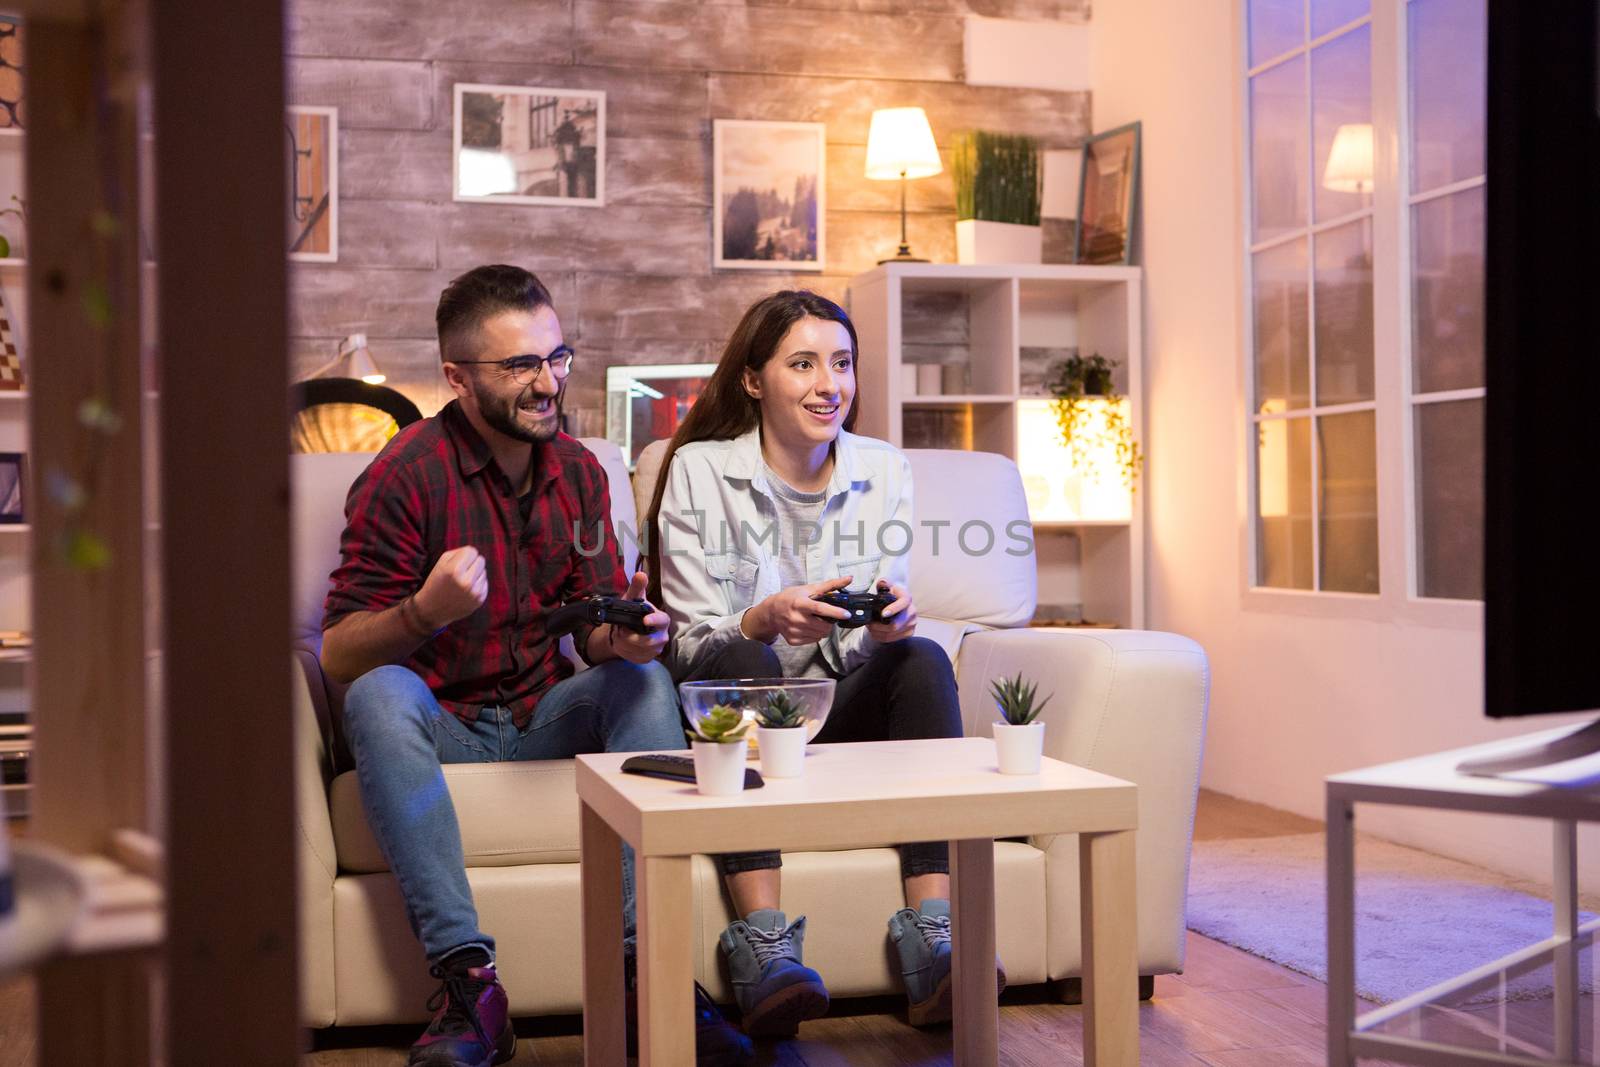 Happy young couple after winning at video games on television sitting on couch at night.